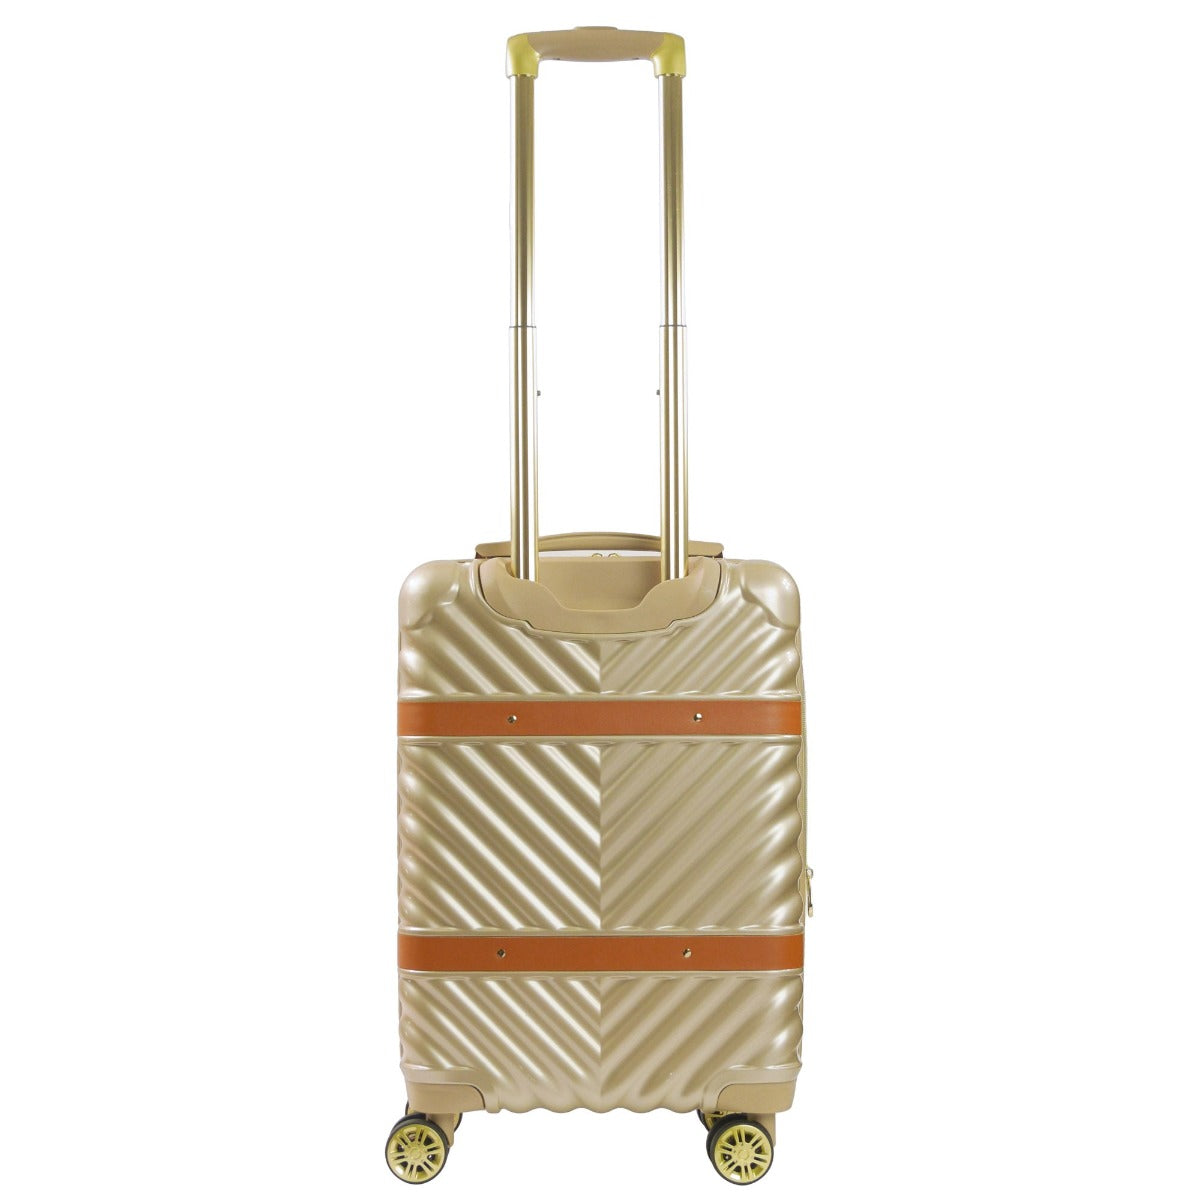 Christian Siriano New York Stella 22" carry on hardside spinner luggage taupe - best durable suitcase for travel